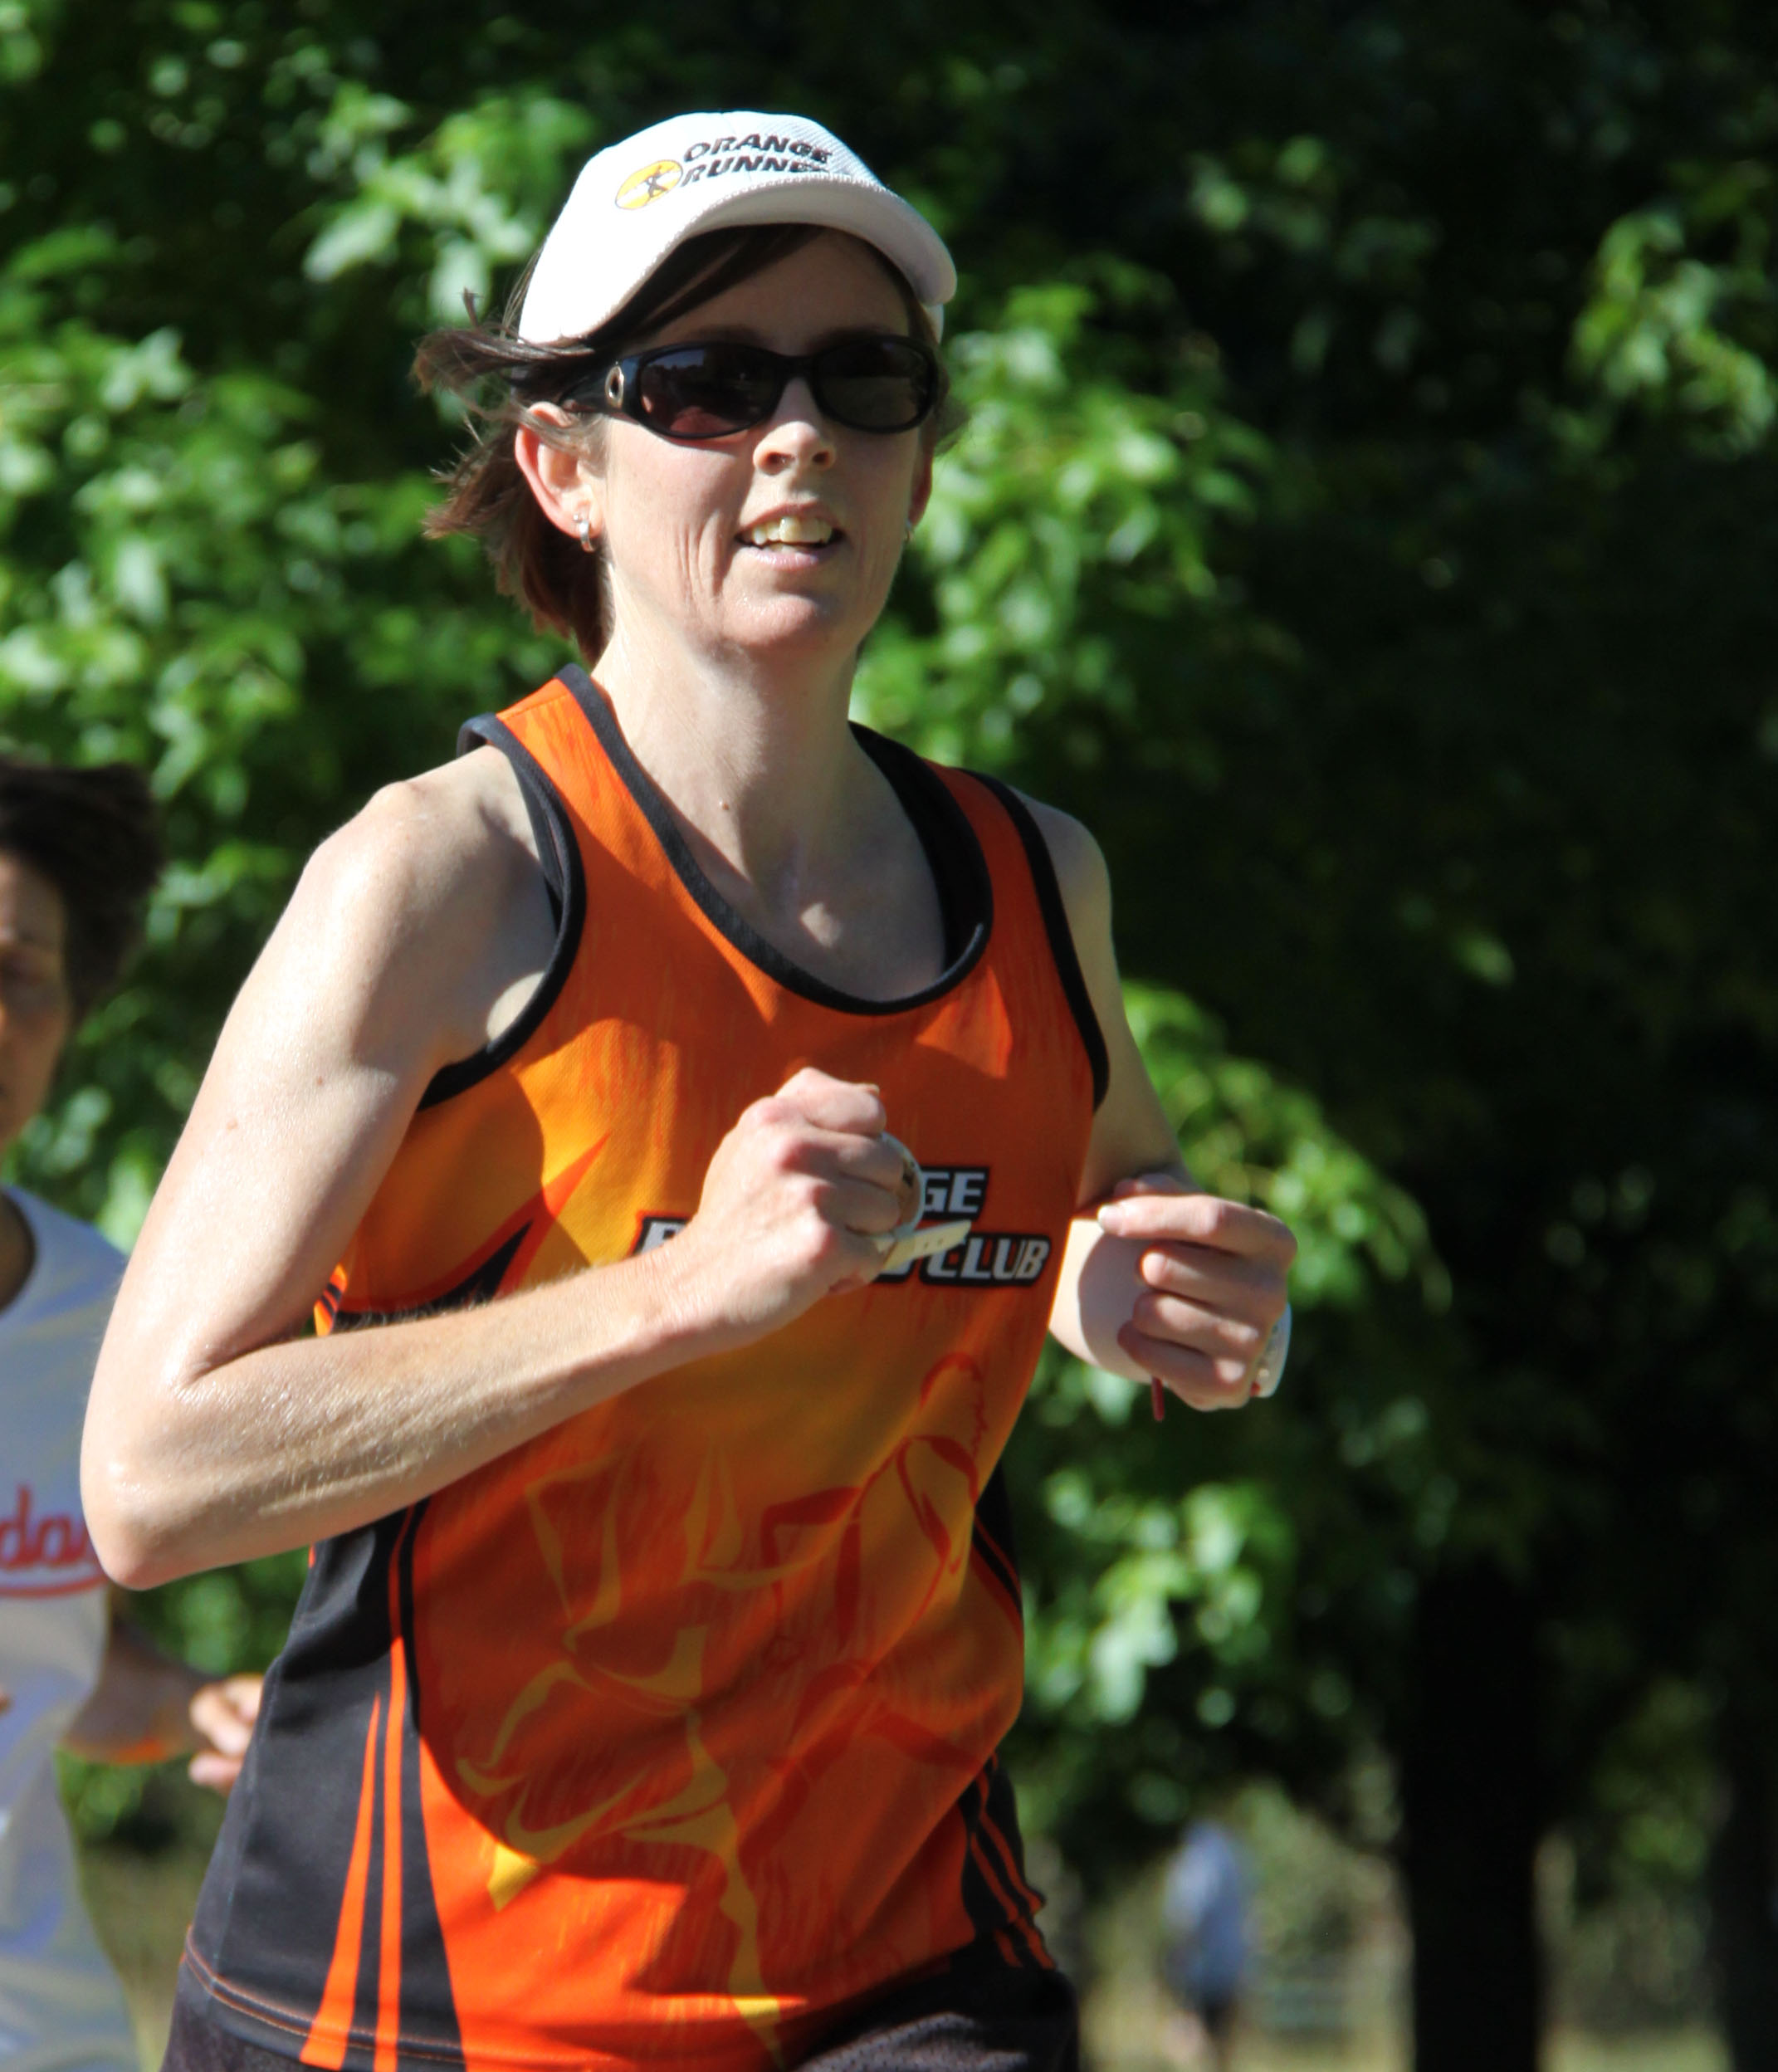 LEADING LADY: Kim Jarvis has been ultra consistent of recent weeks, placing most weekends and being the fastest female runner on Wednesday. Kim also has the third most amount of club runs overall with 1143 starts.